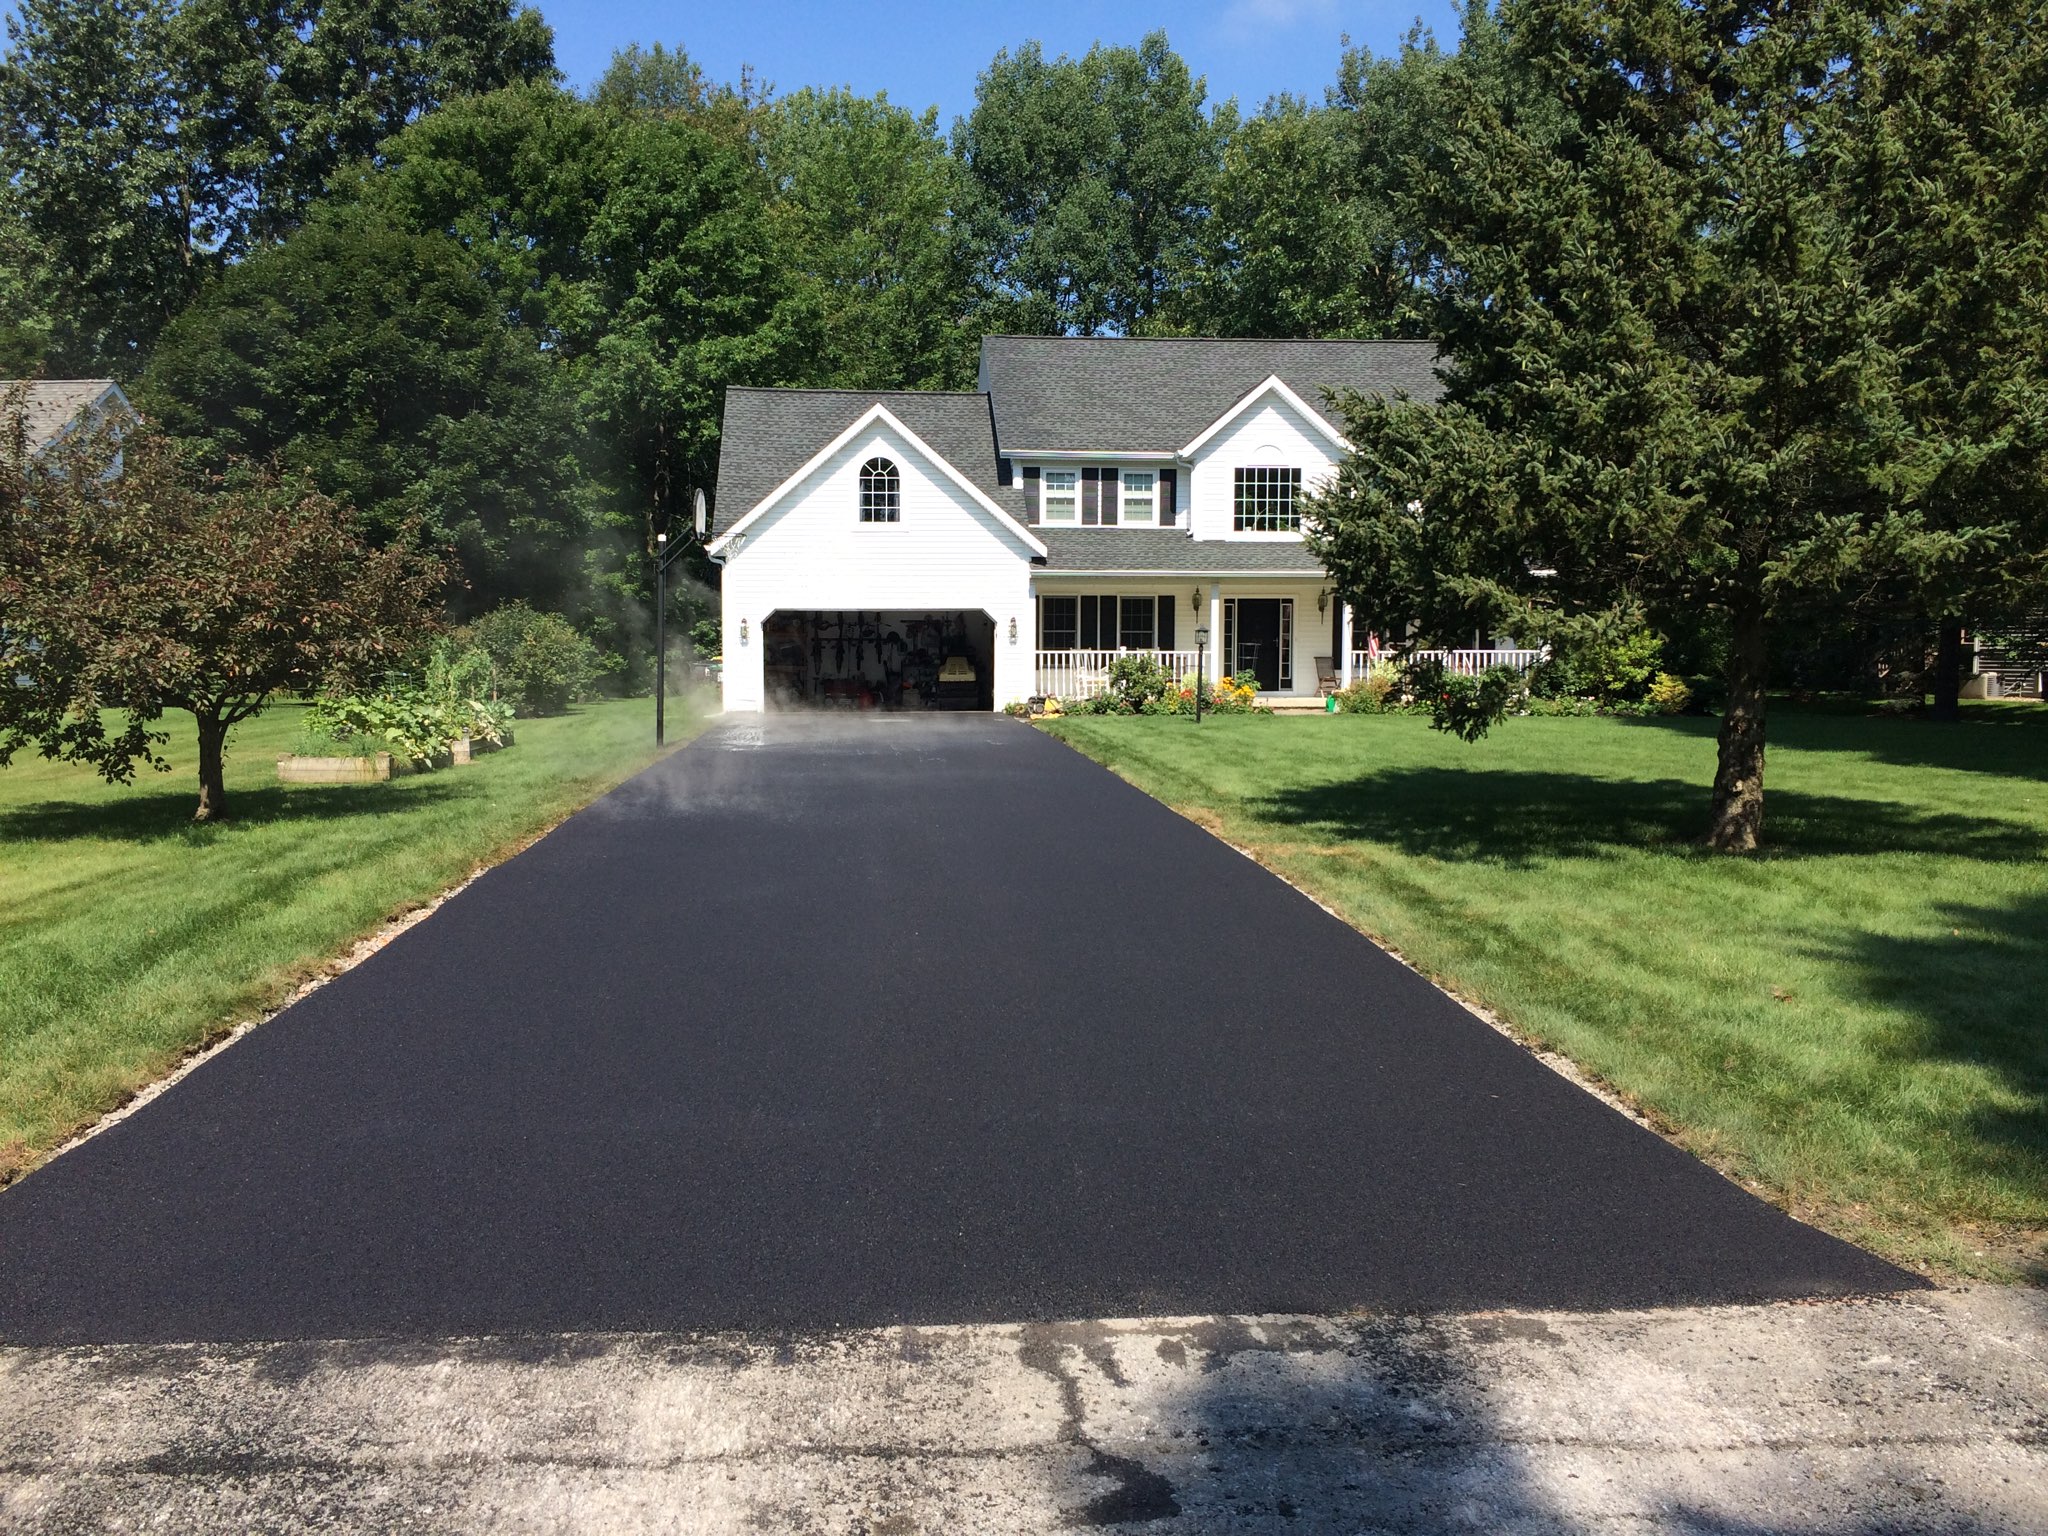 White house with a freshly-paved asphalt driveway